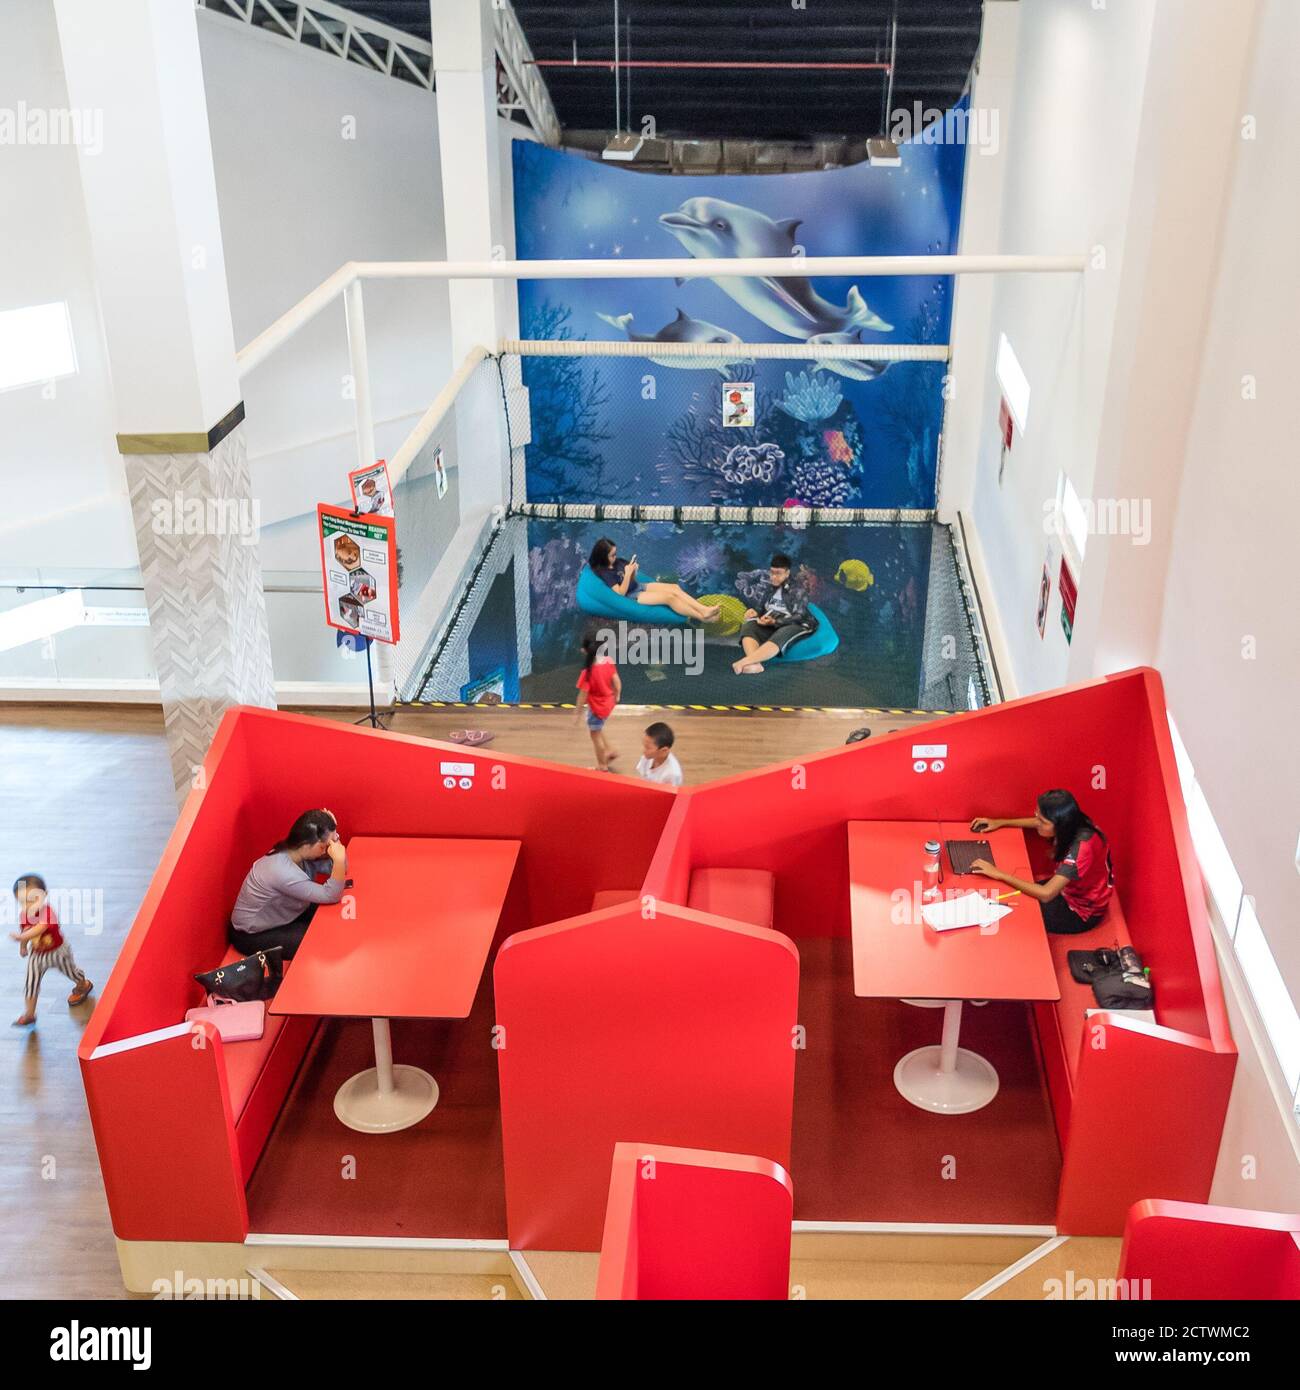 Kota Kinabalu, Sabah, Malaysia:Reading space for kids and teenagers in the Sabah Regional Library at Tanjung Aru Plaza, opened on April 1 2019. Stock Photo